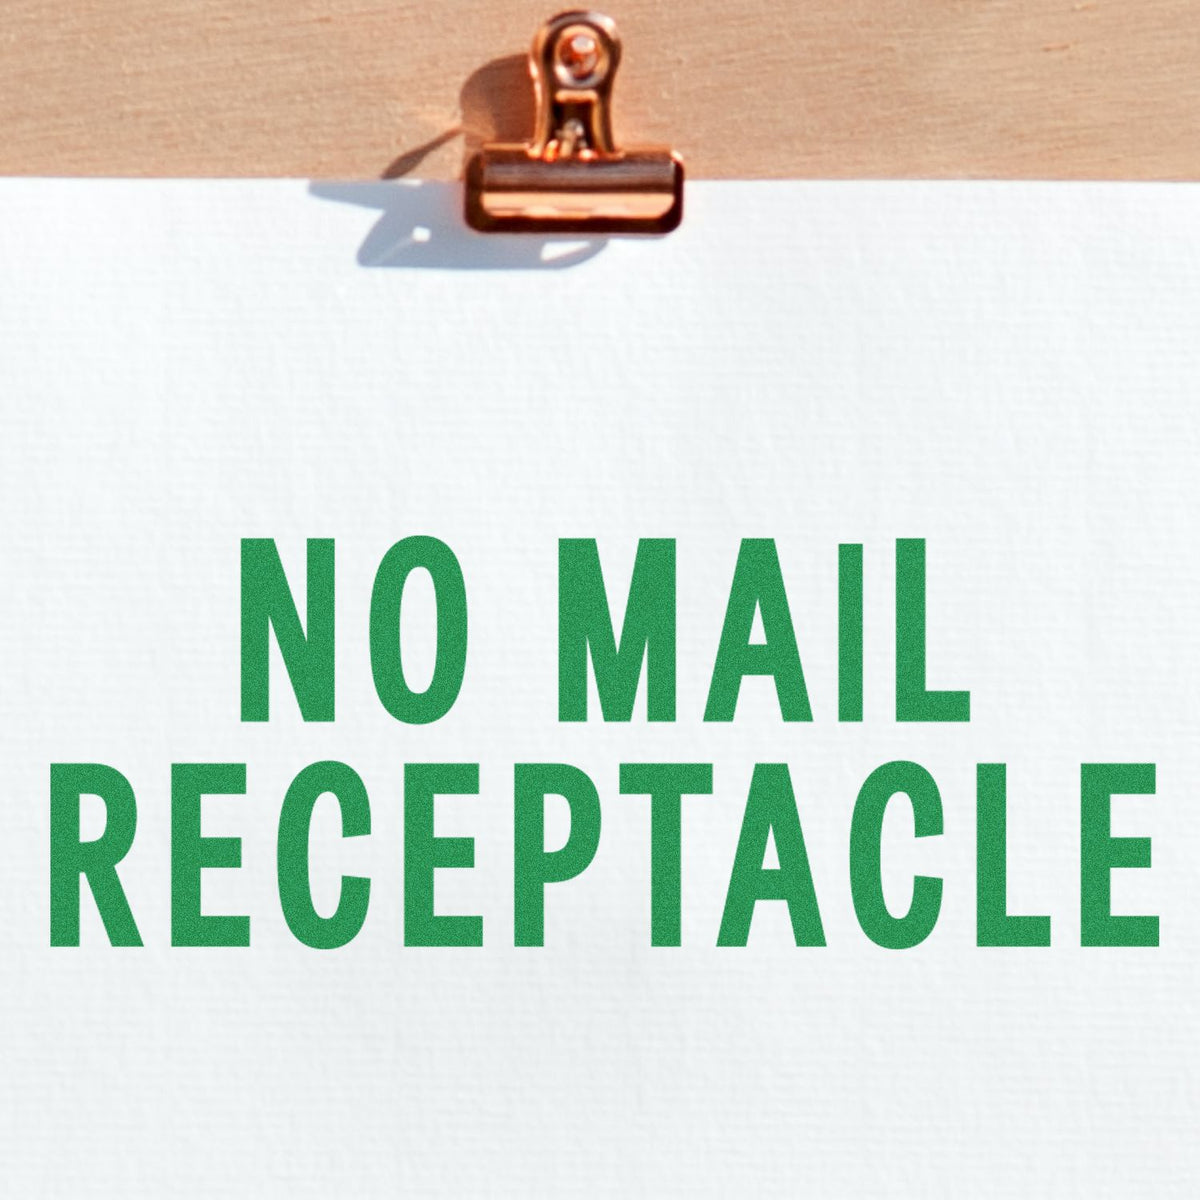 No Mail Receptacle Rubber Stamp In Use